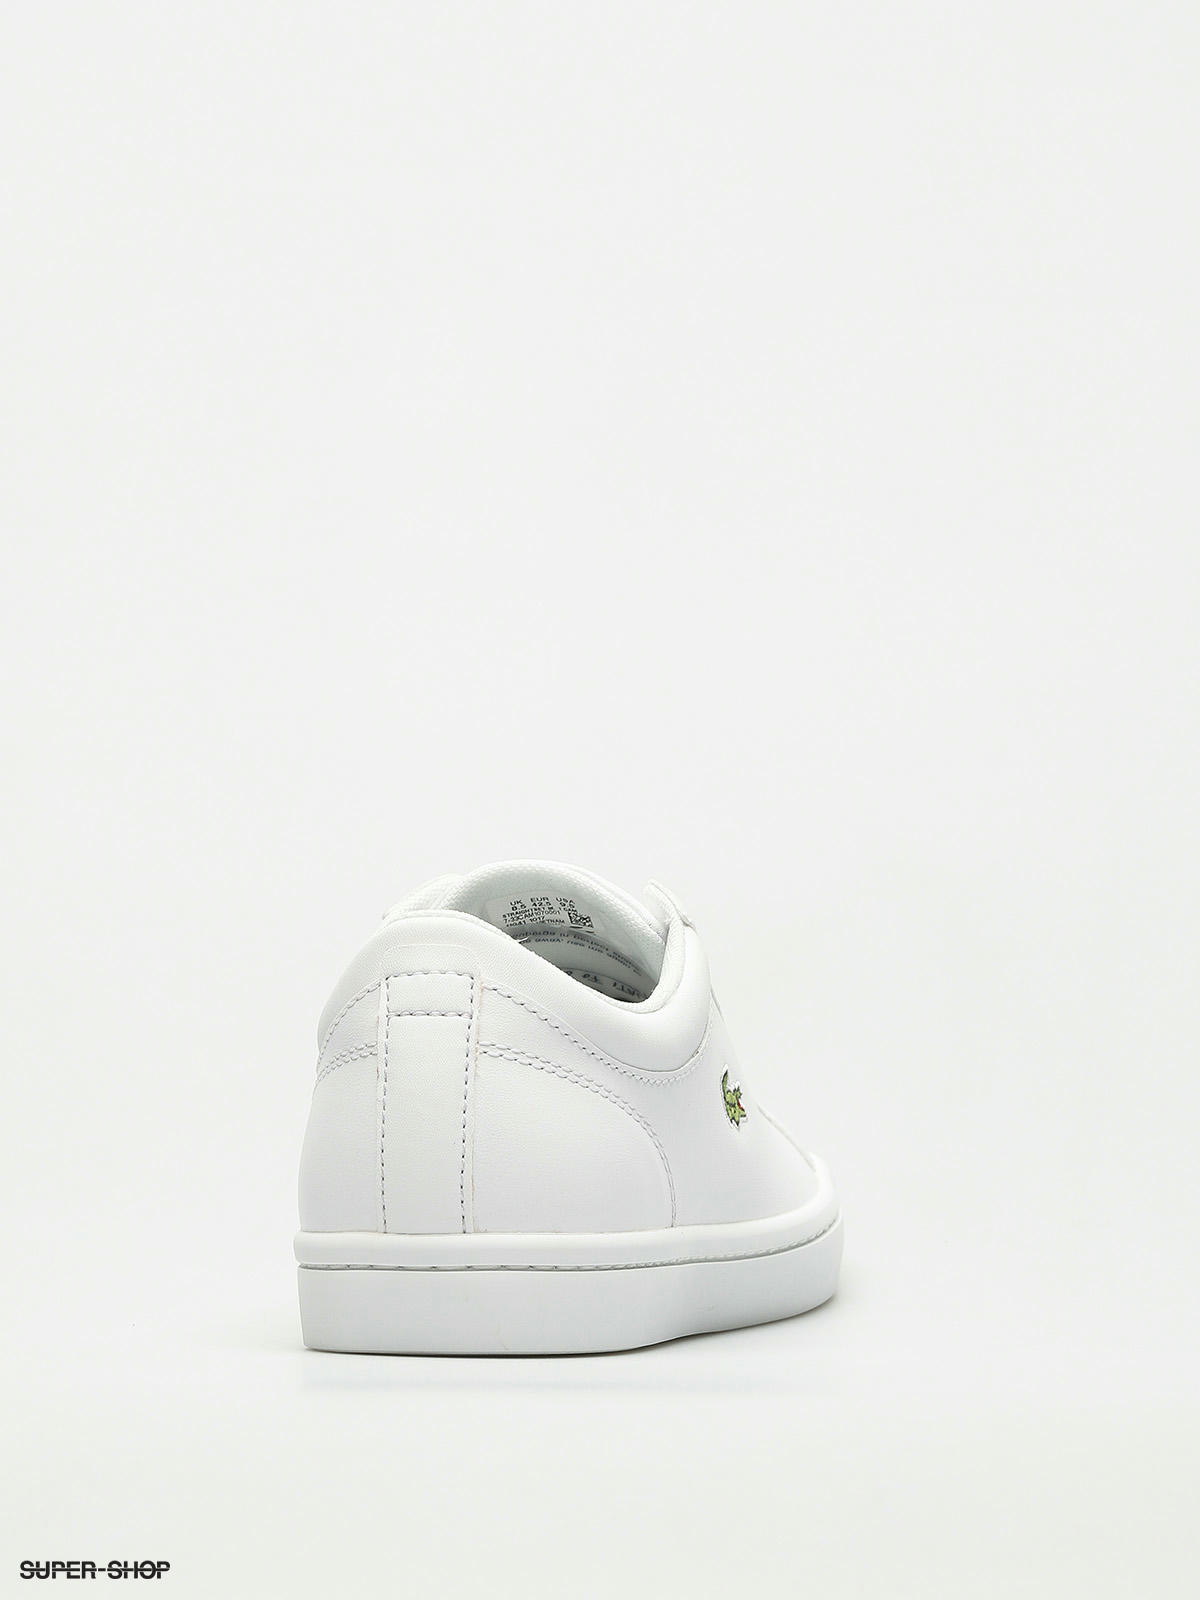 lacoste straightset bl 1